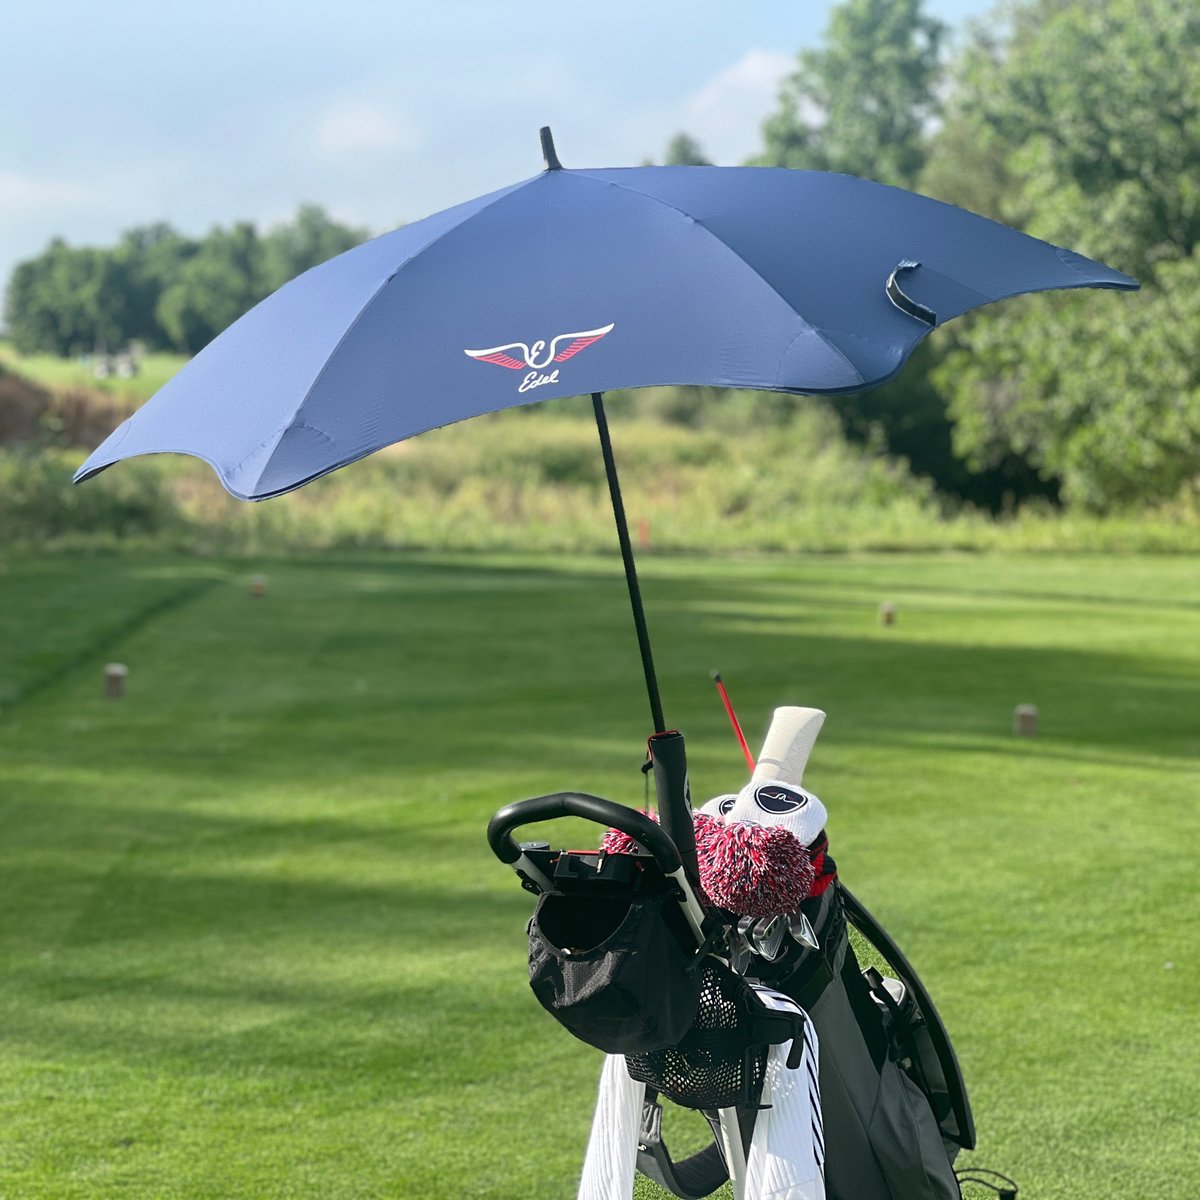 Rain ☔️ or shine ☀️, stay dry and cool on the course this season with our premium umbrella from BLUNT Umbrellas! Don't let the weather dictate your play. Buy now ➡️ loom.ly/MHLd0fw #teamedel #edelgolf #oneshot #umbrella #spring #raingear #golfgear #golf